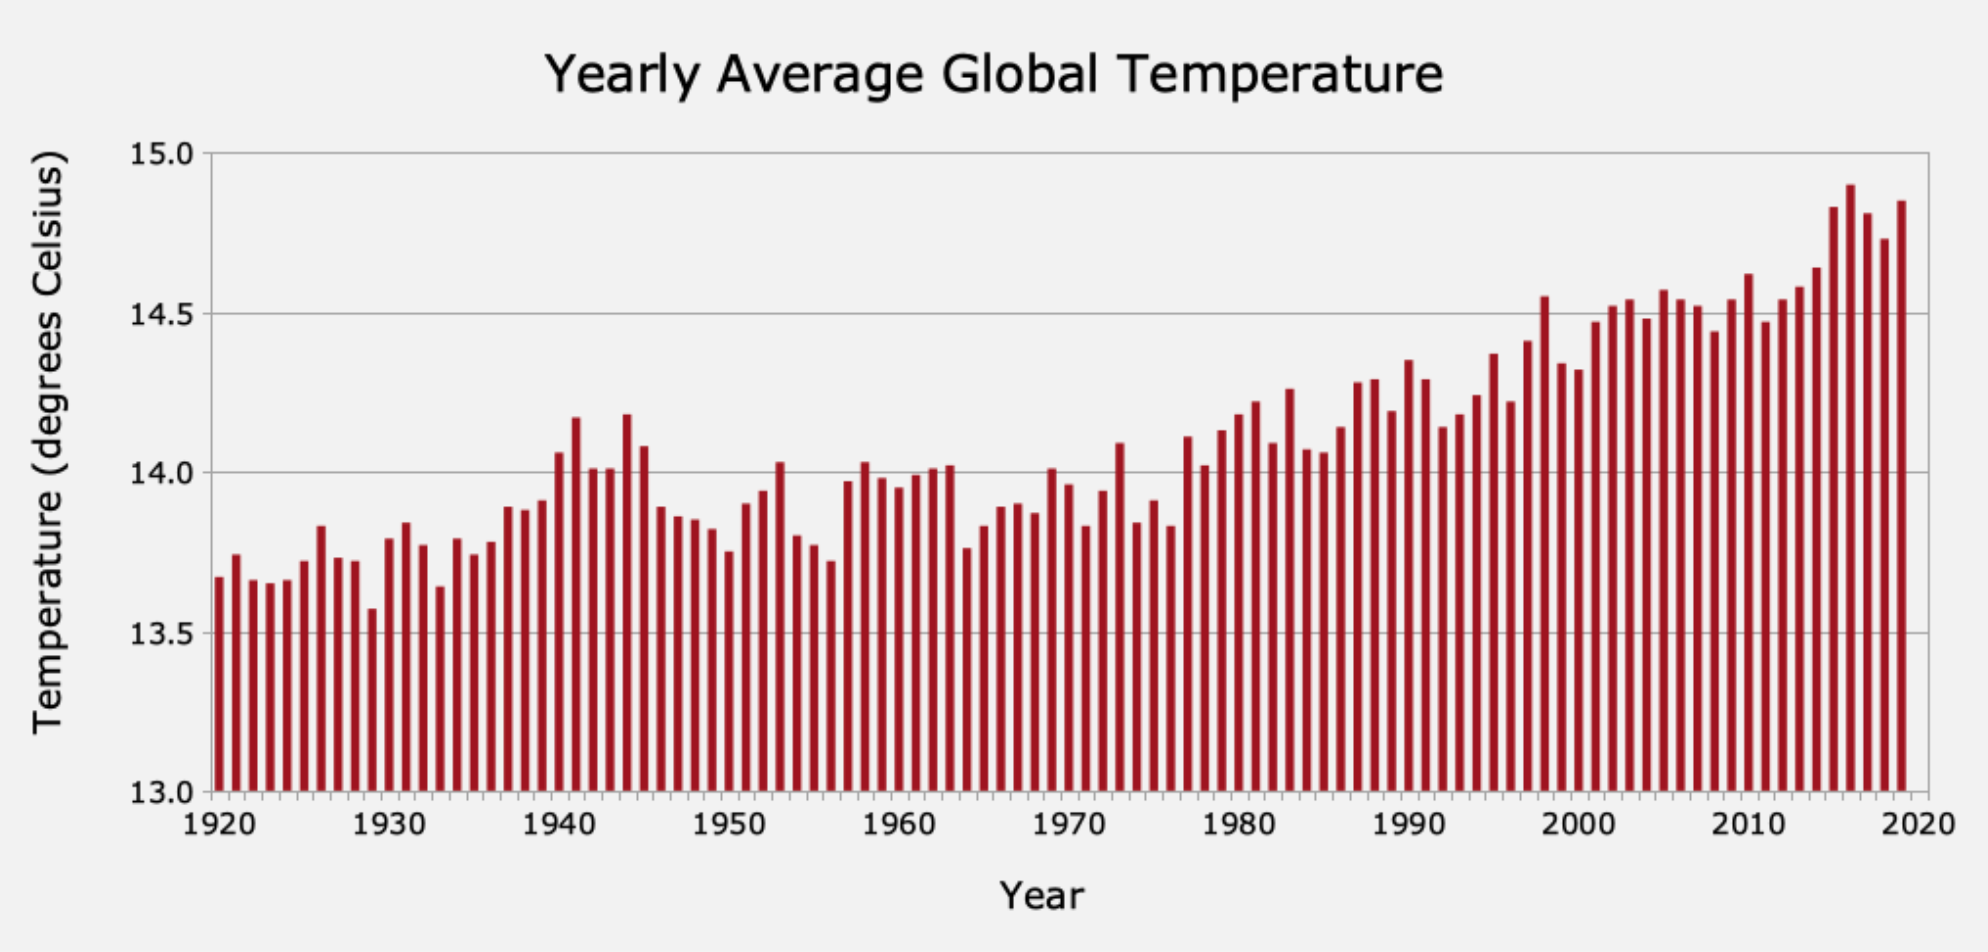 Yearly Average Global Temperatures for 70 Years (2030-2100)